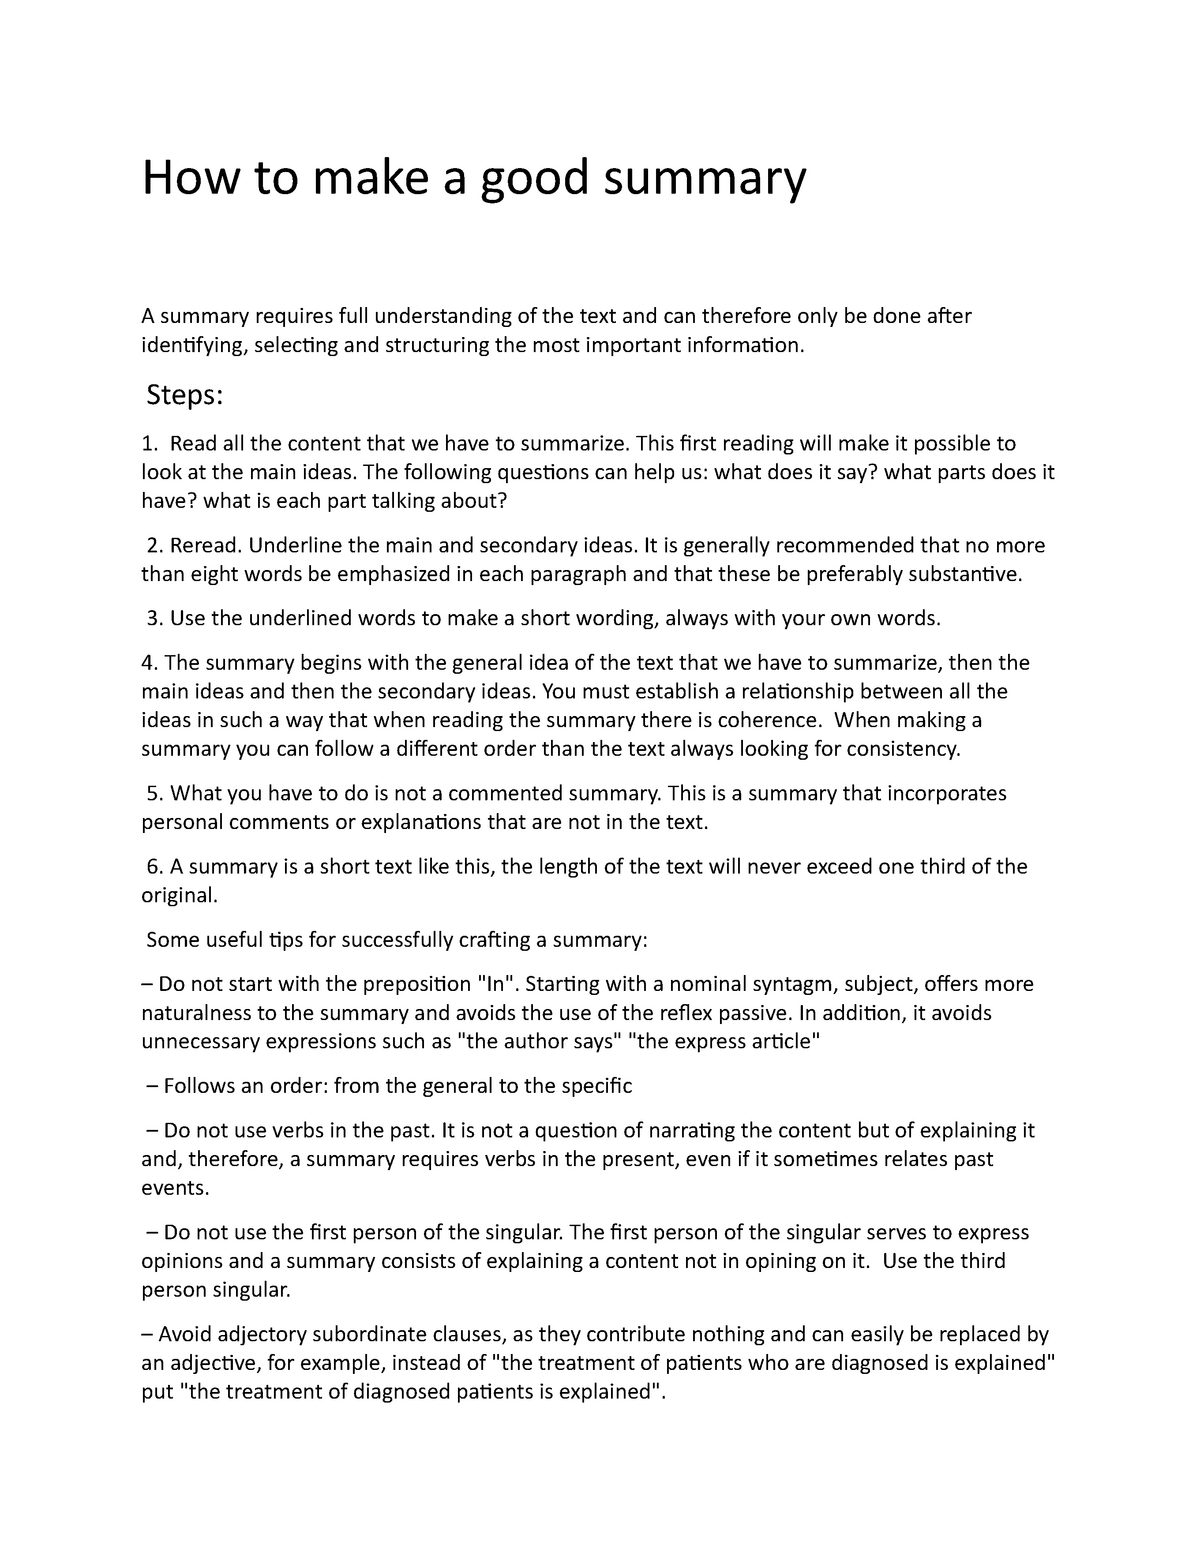 how-to-make-a-good-summary-steps-read-all-the-content-that-we-have